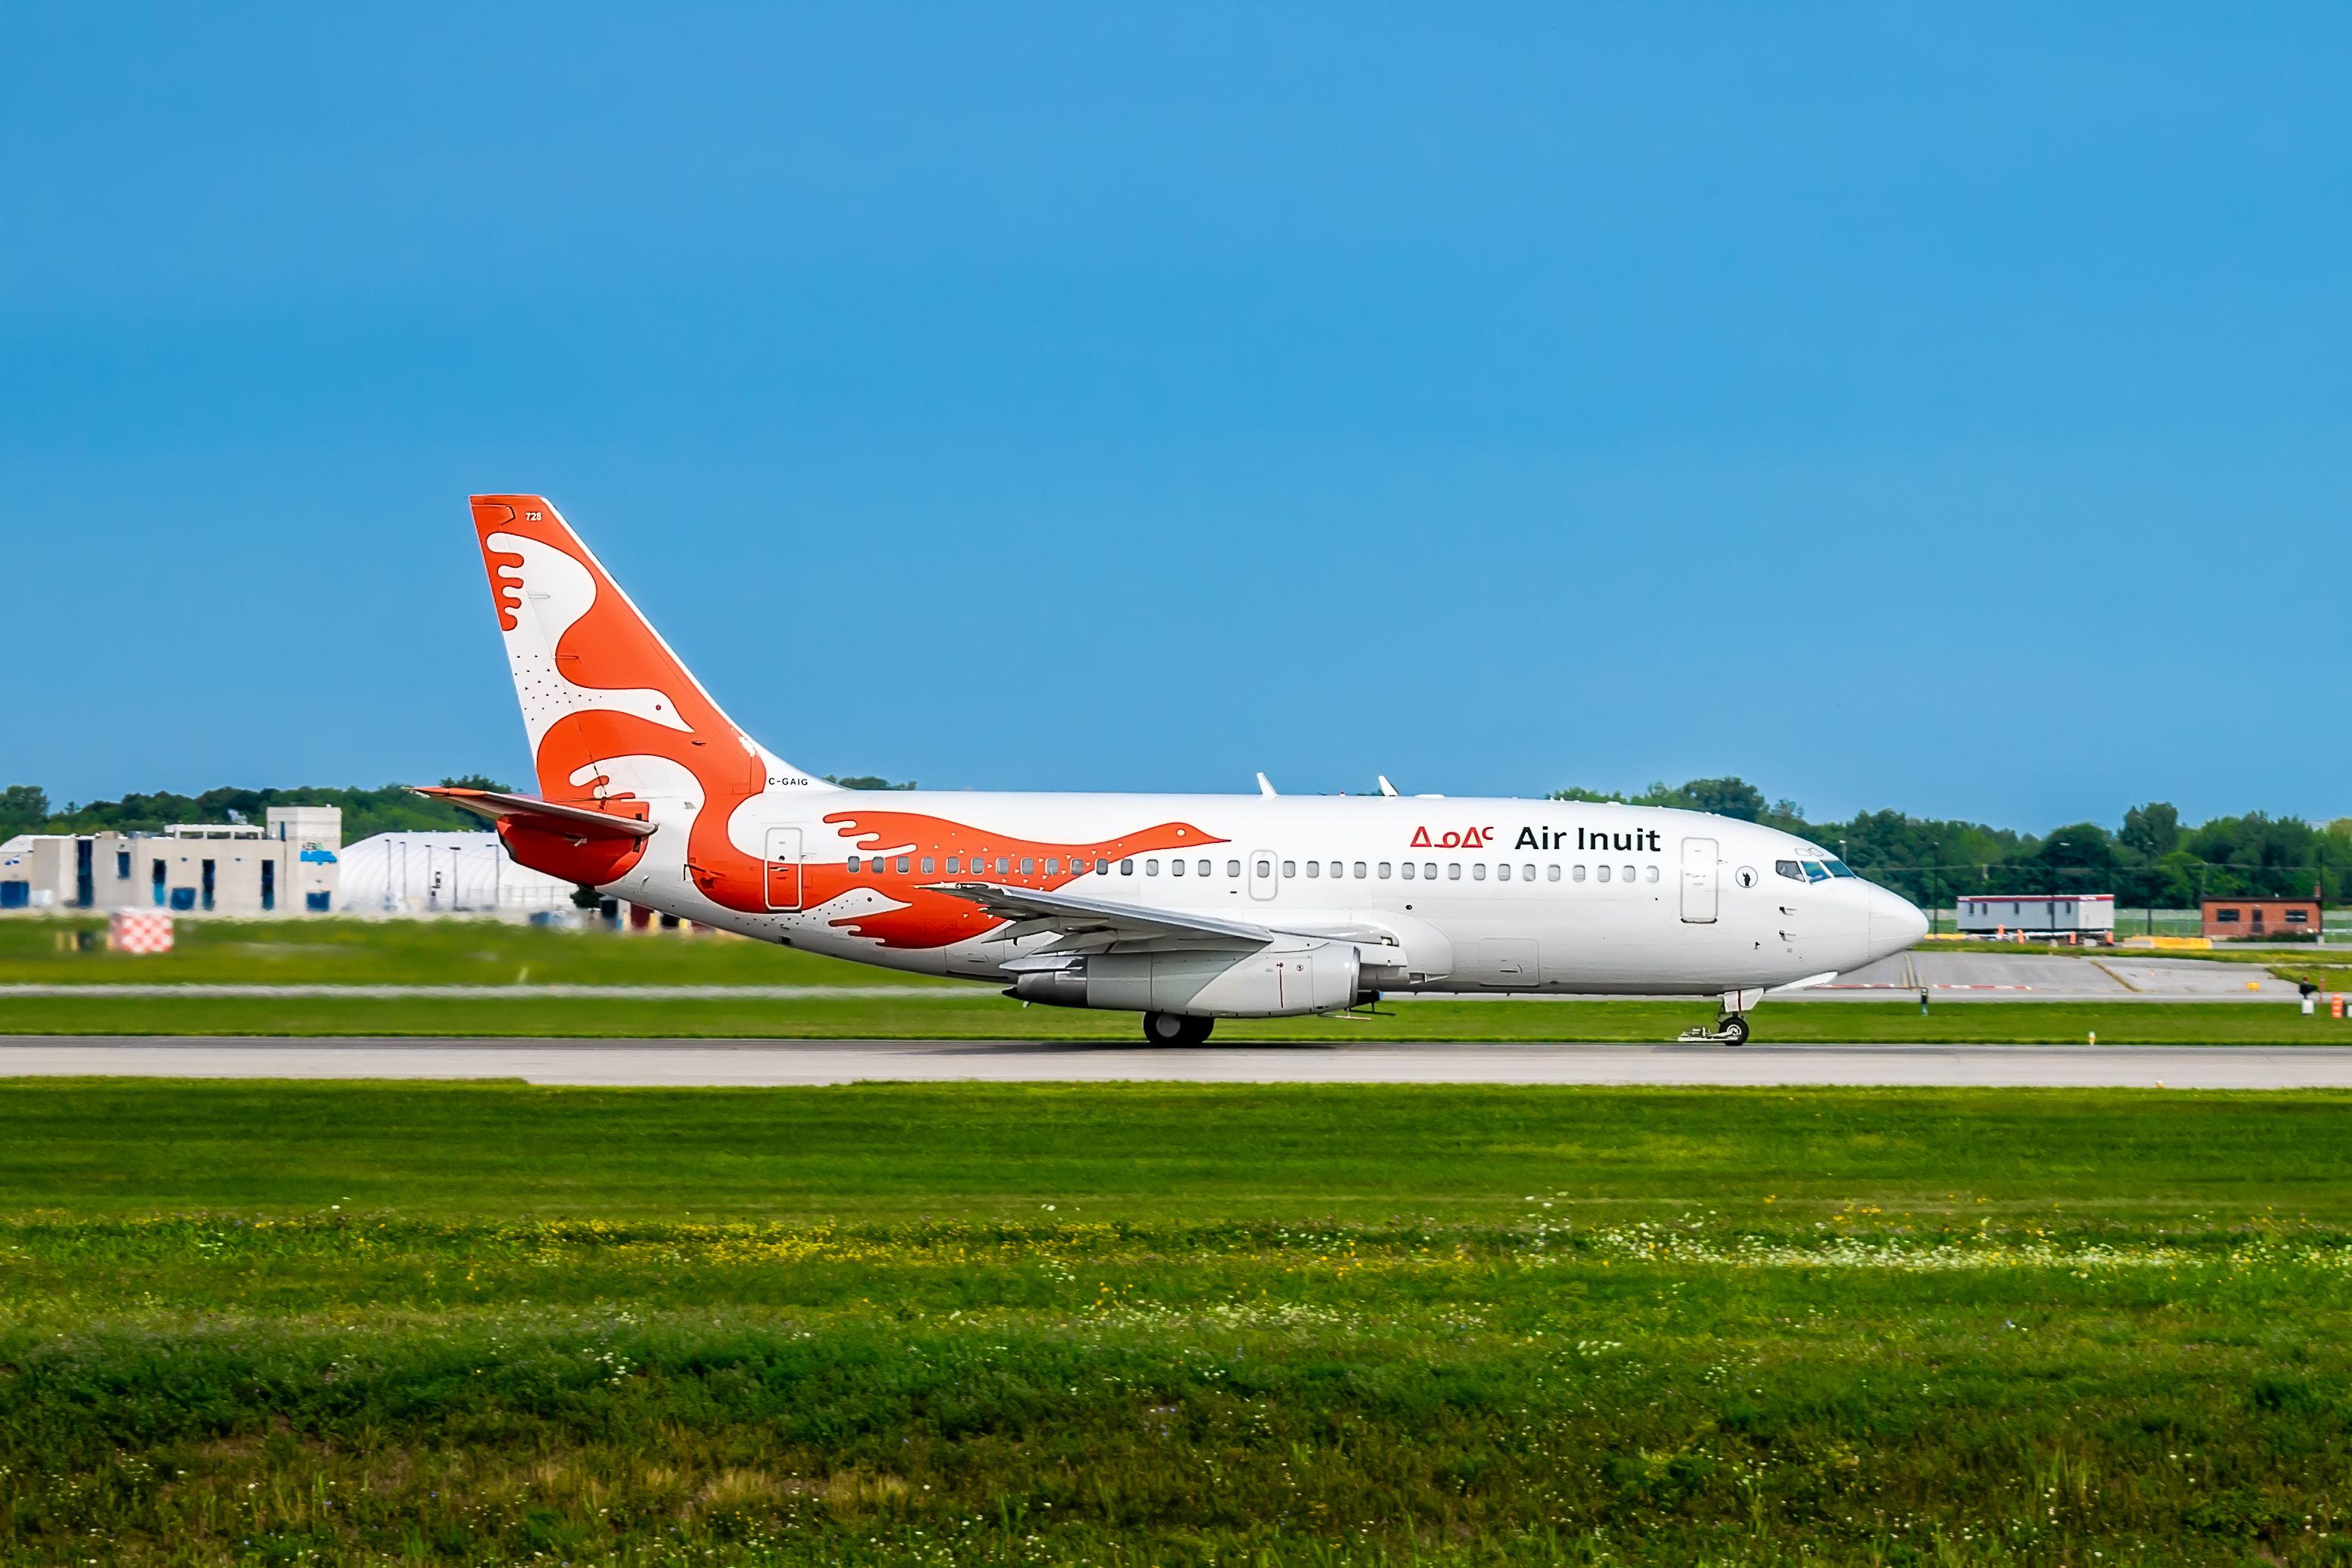 An Air Inuit Boeing 737-200C on a runway.